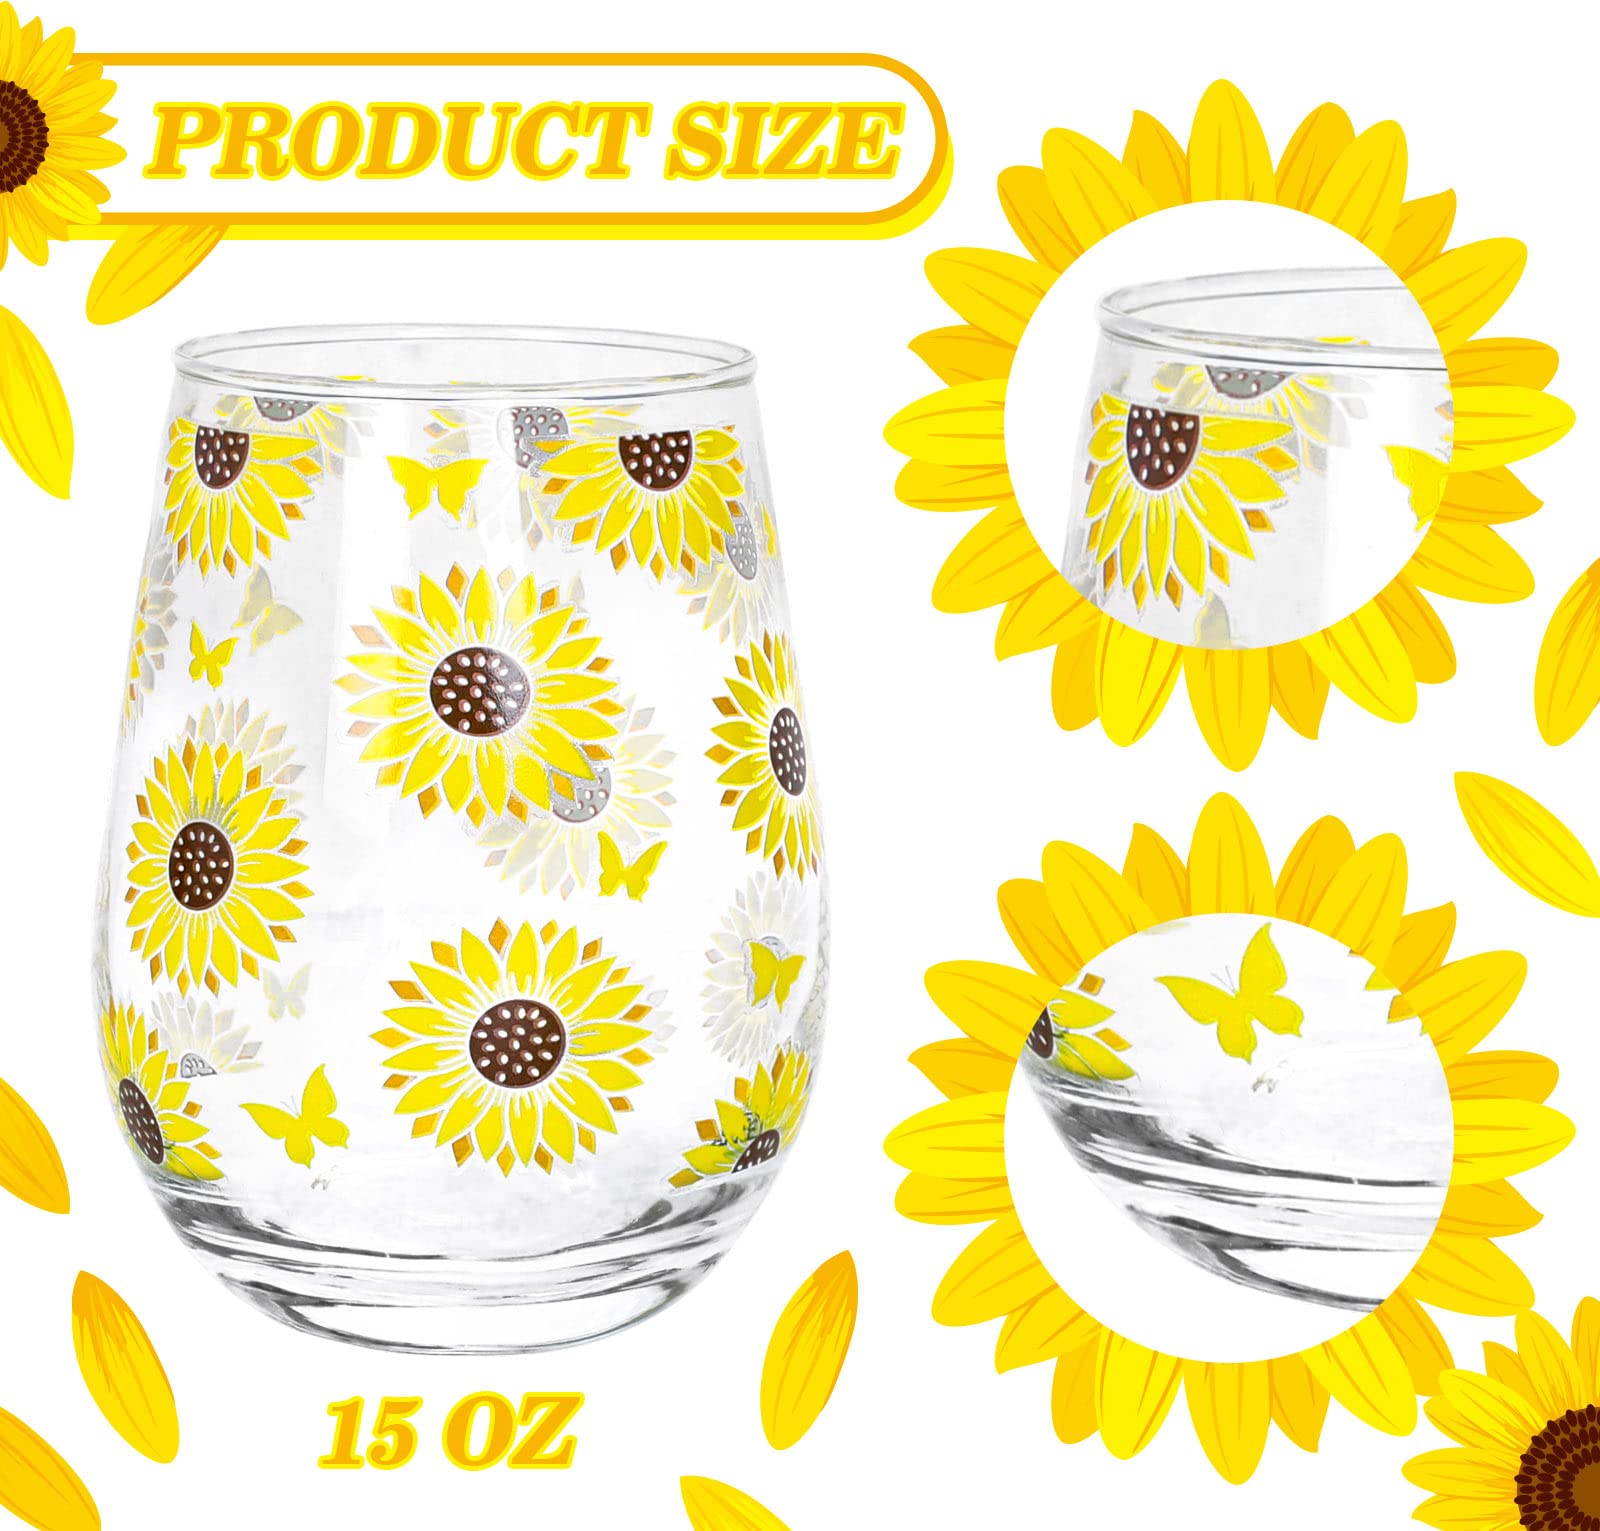 AnyDesign Sunflower Stemless Wine Glasses Summer Drinking Glasses Set of 2 Yellow Flower Butterfly Glasses for Bridal Party Wedding Whiskey Beer Farmhouse Kitchen Home Decor Father's Day